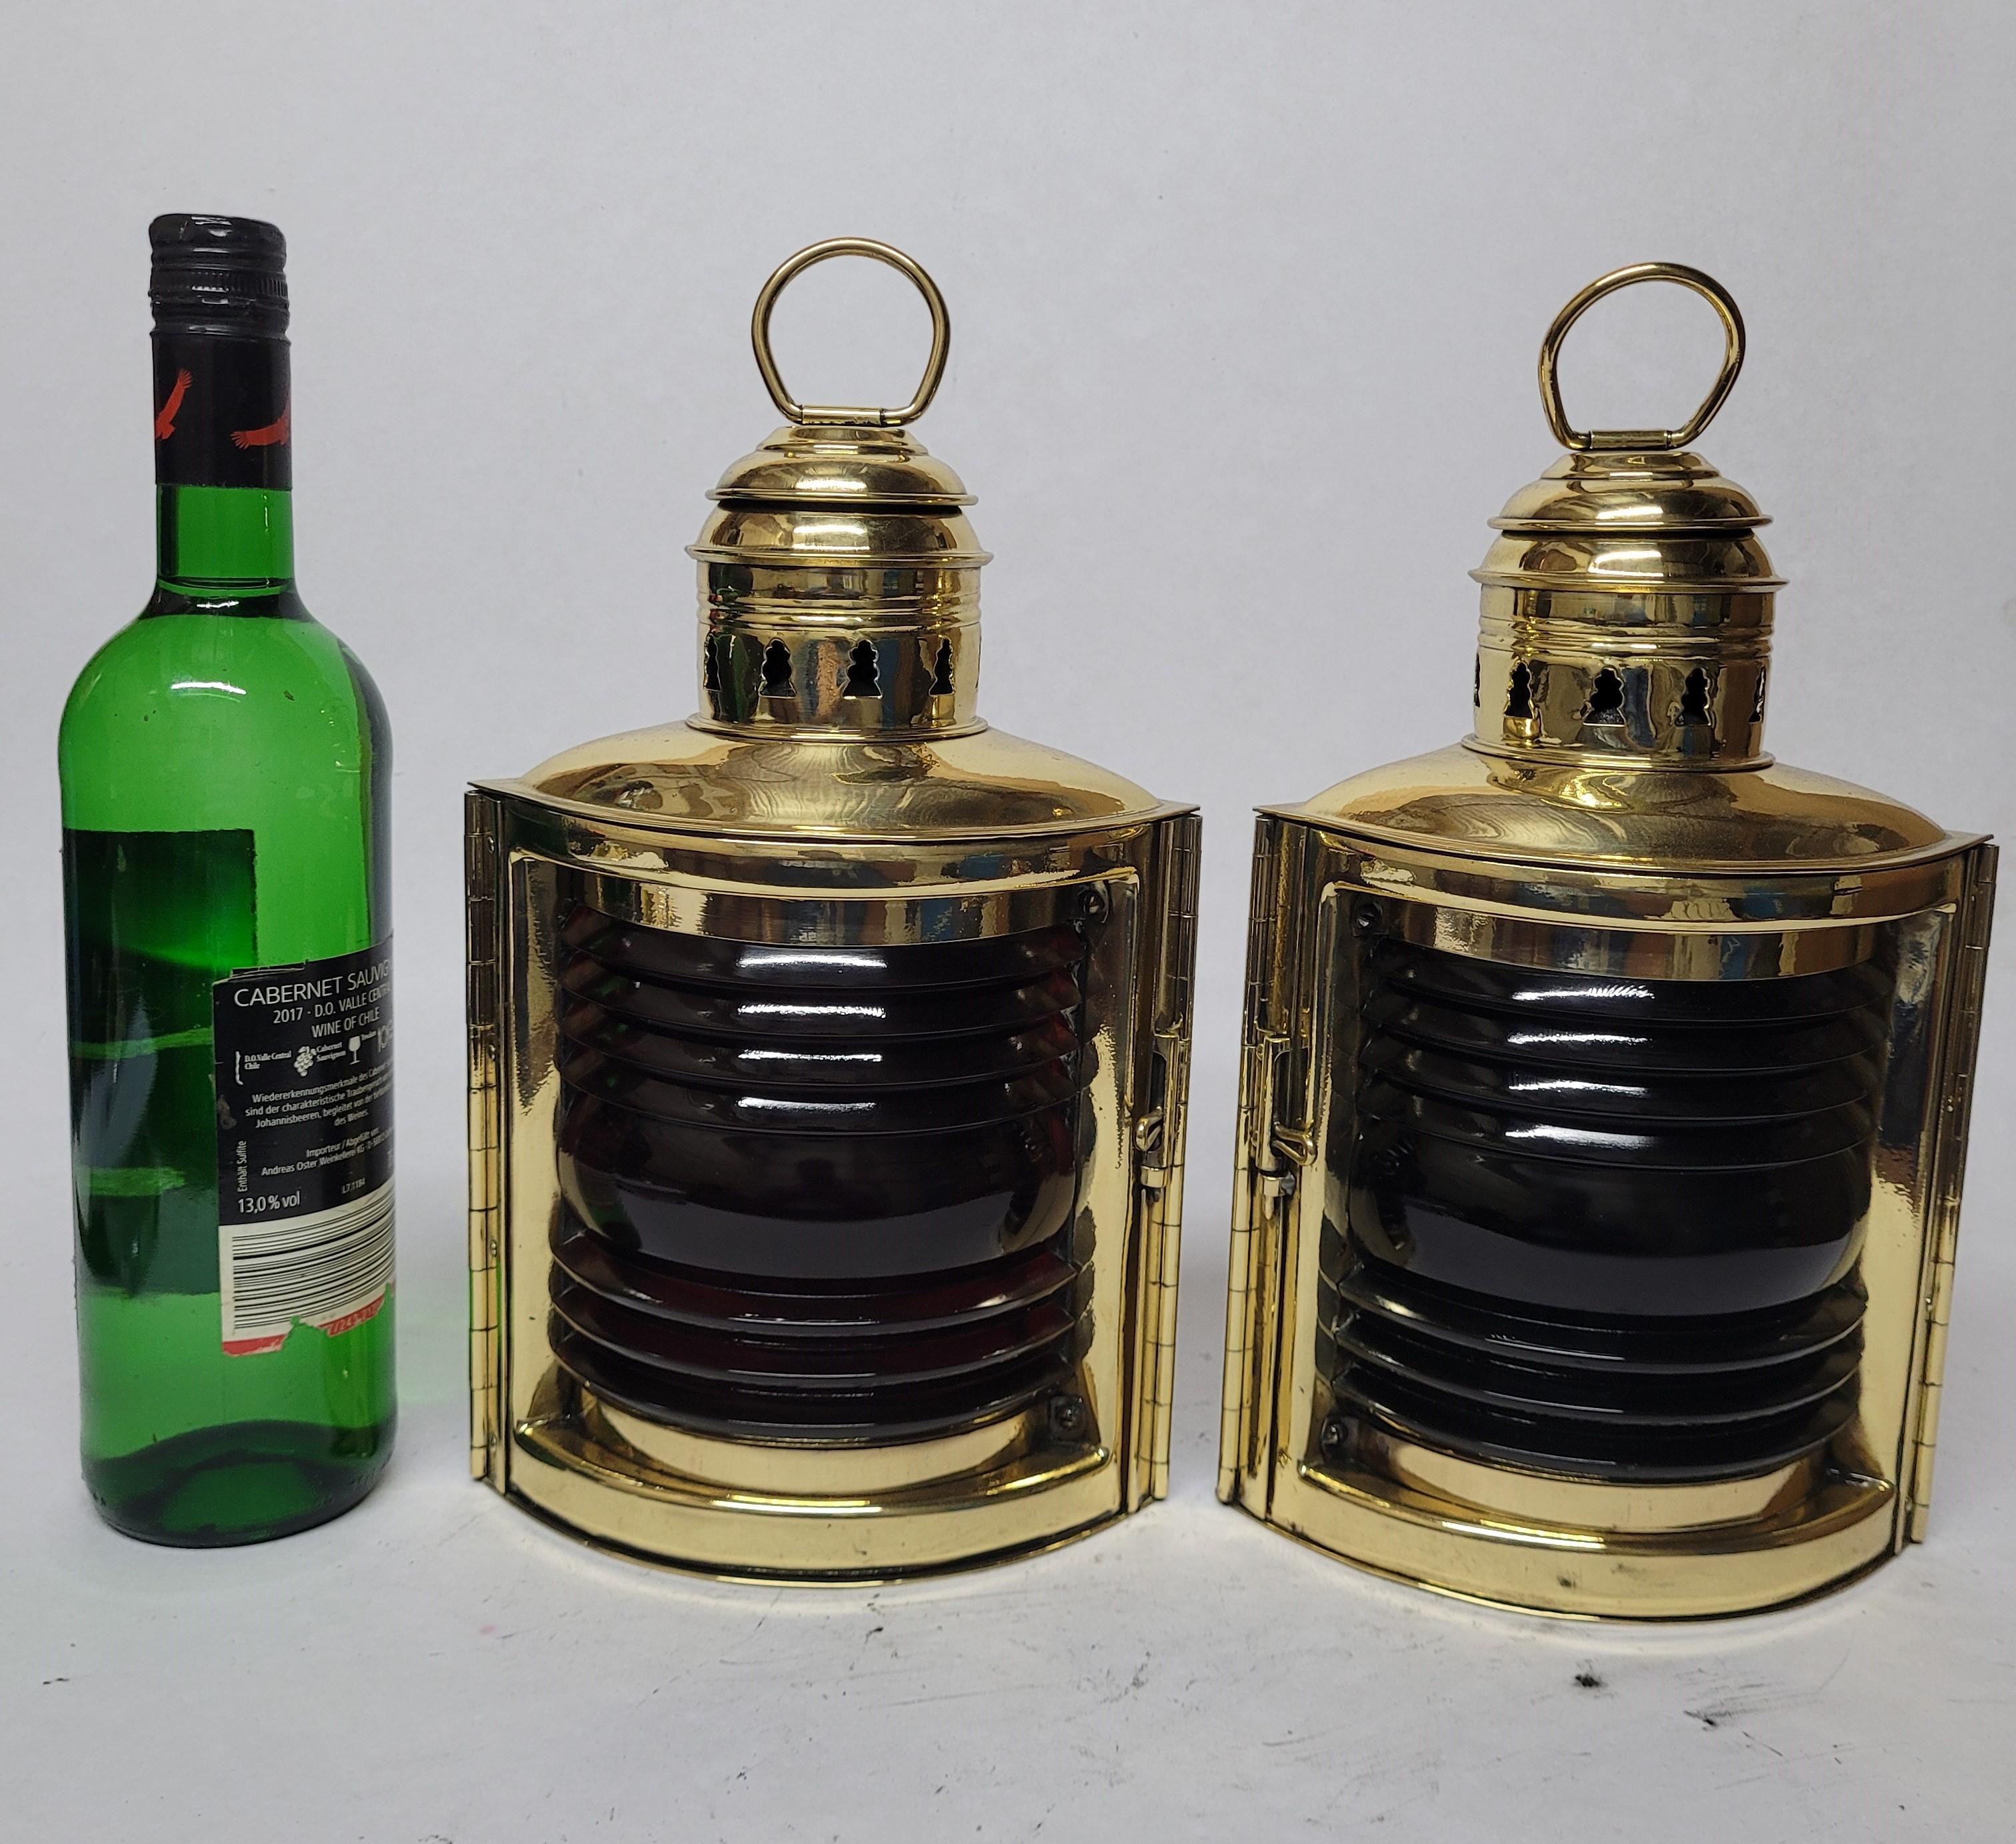 Superb pair of ships port and starboard lanterns. Meticulously polished and lacquered. With makers badges 